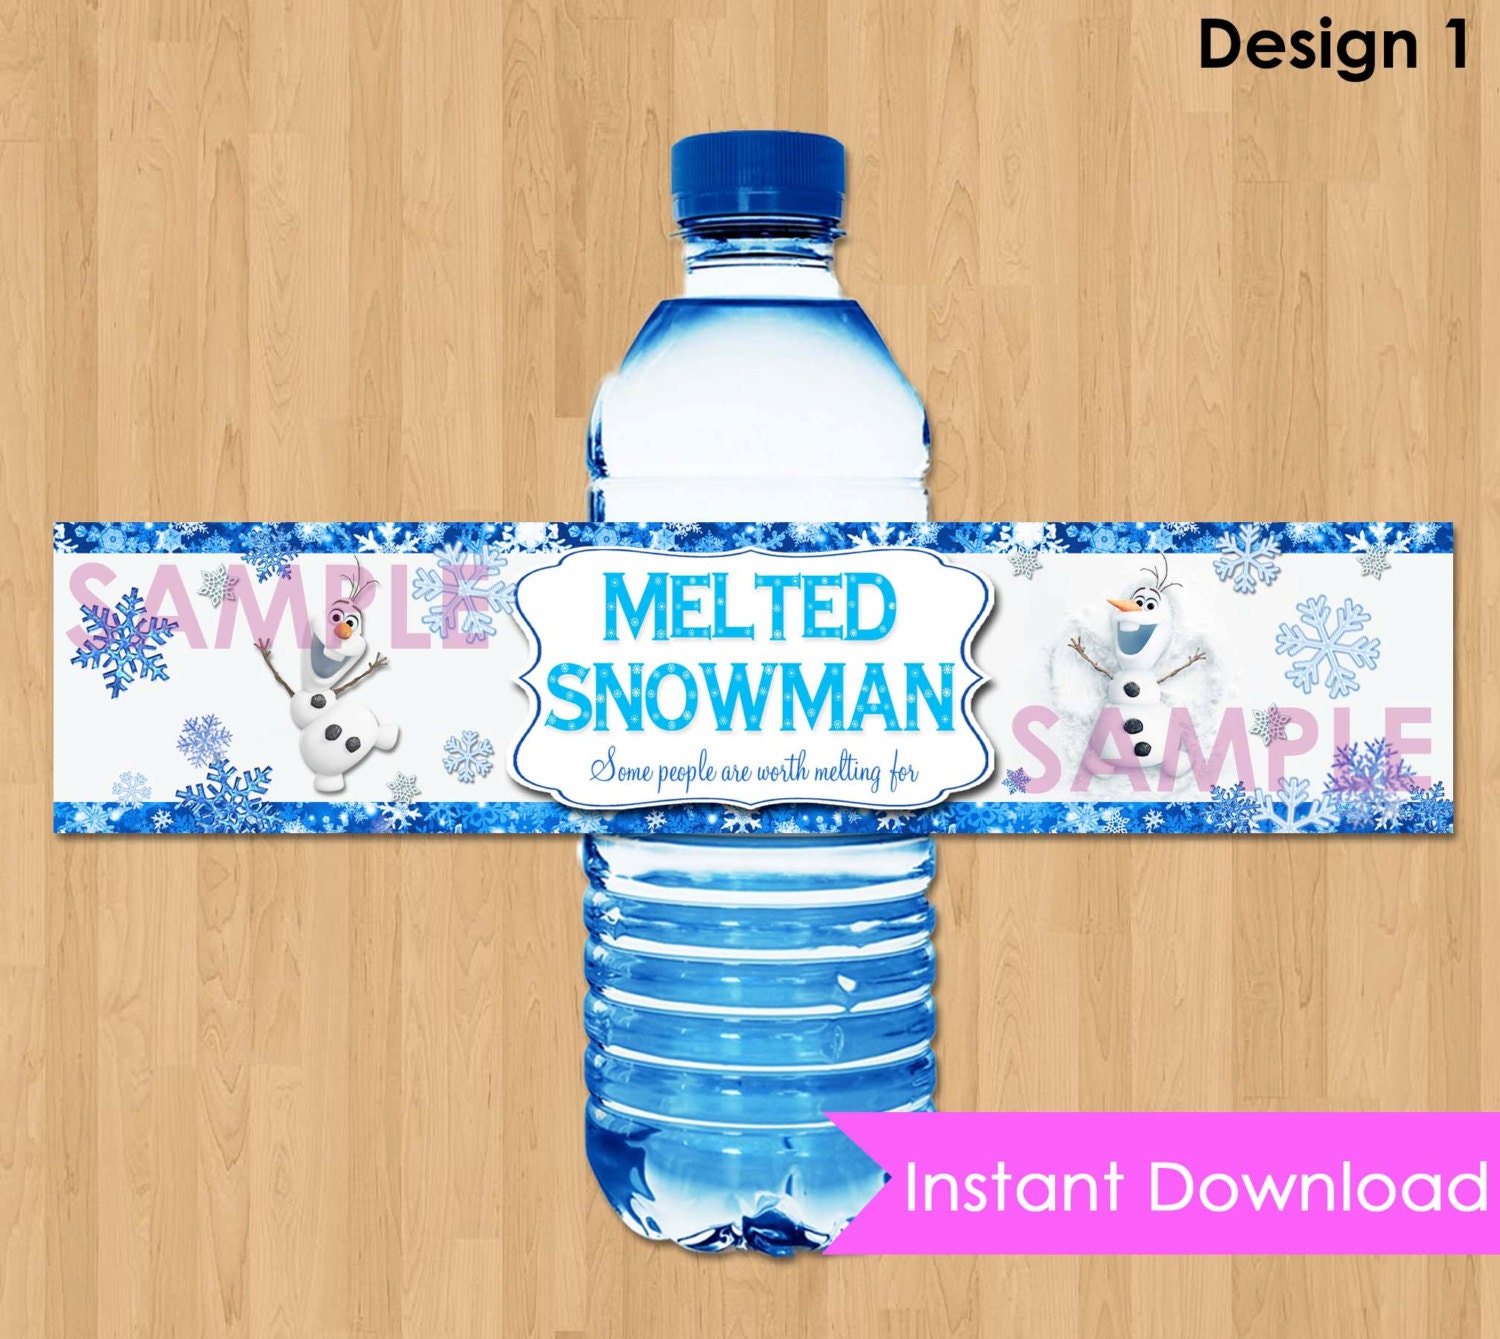 Frozen Bottle Labels - INSTANT DOWNLOAD 2x9"  Melted Snowman Disney Frozen Water Bottle Labels - Birthday Party Printable matches Invitation